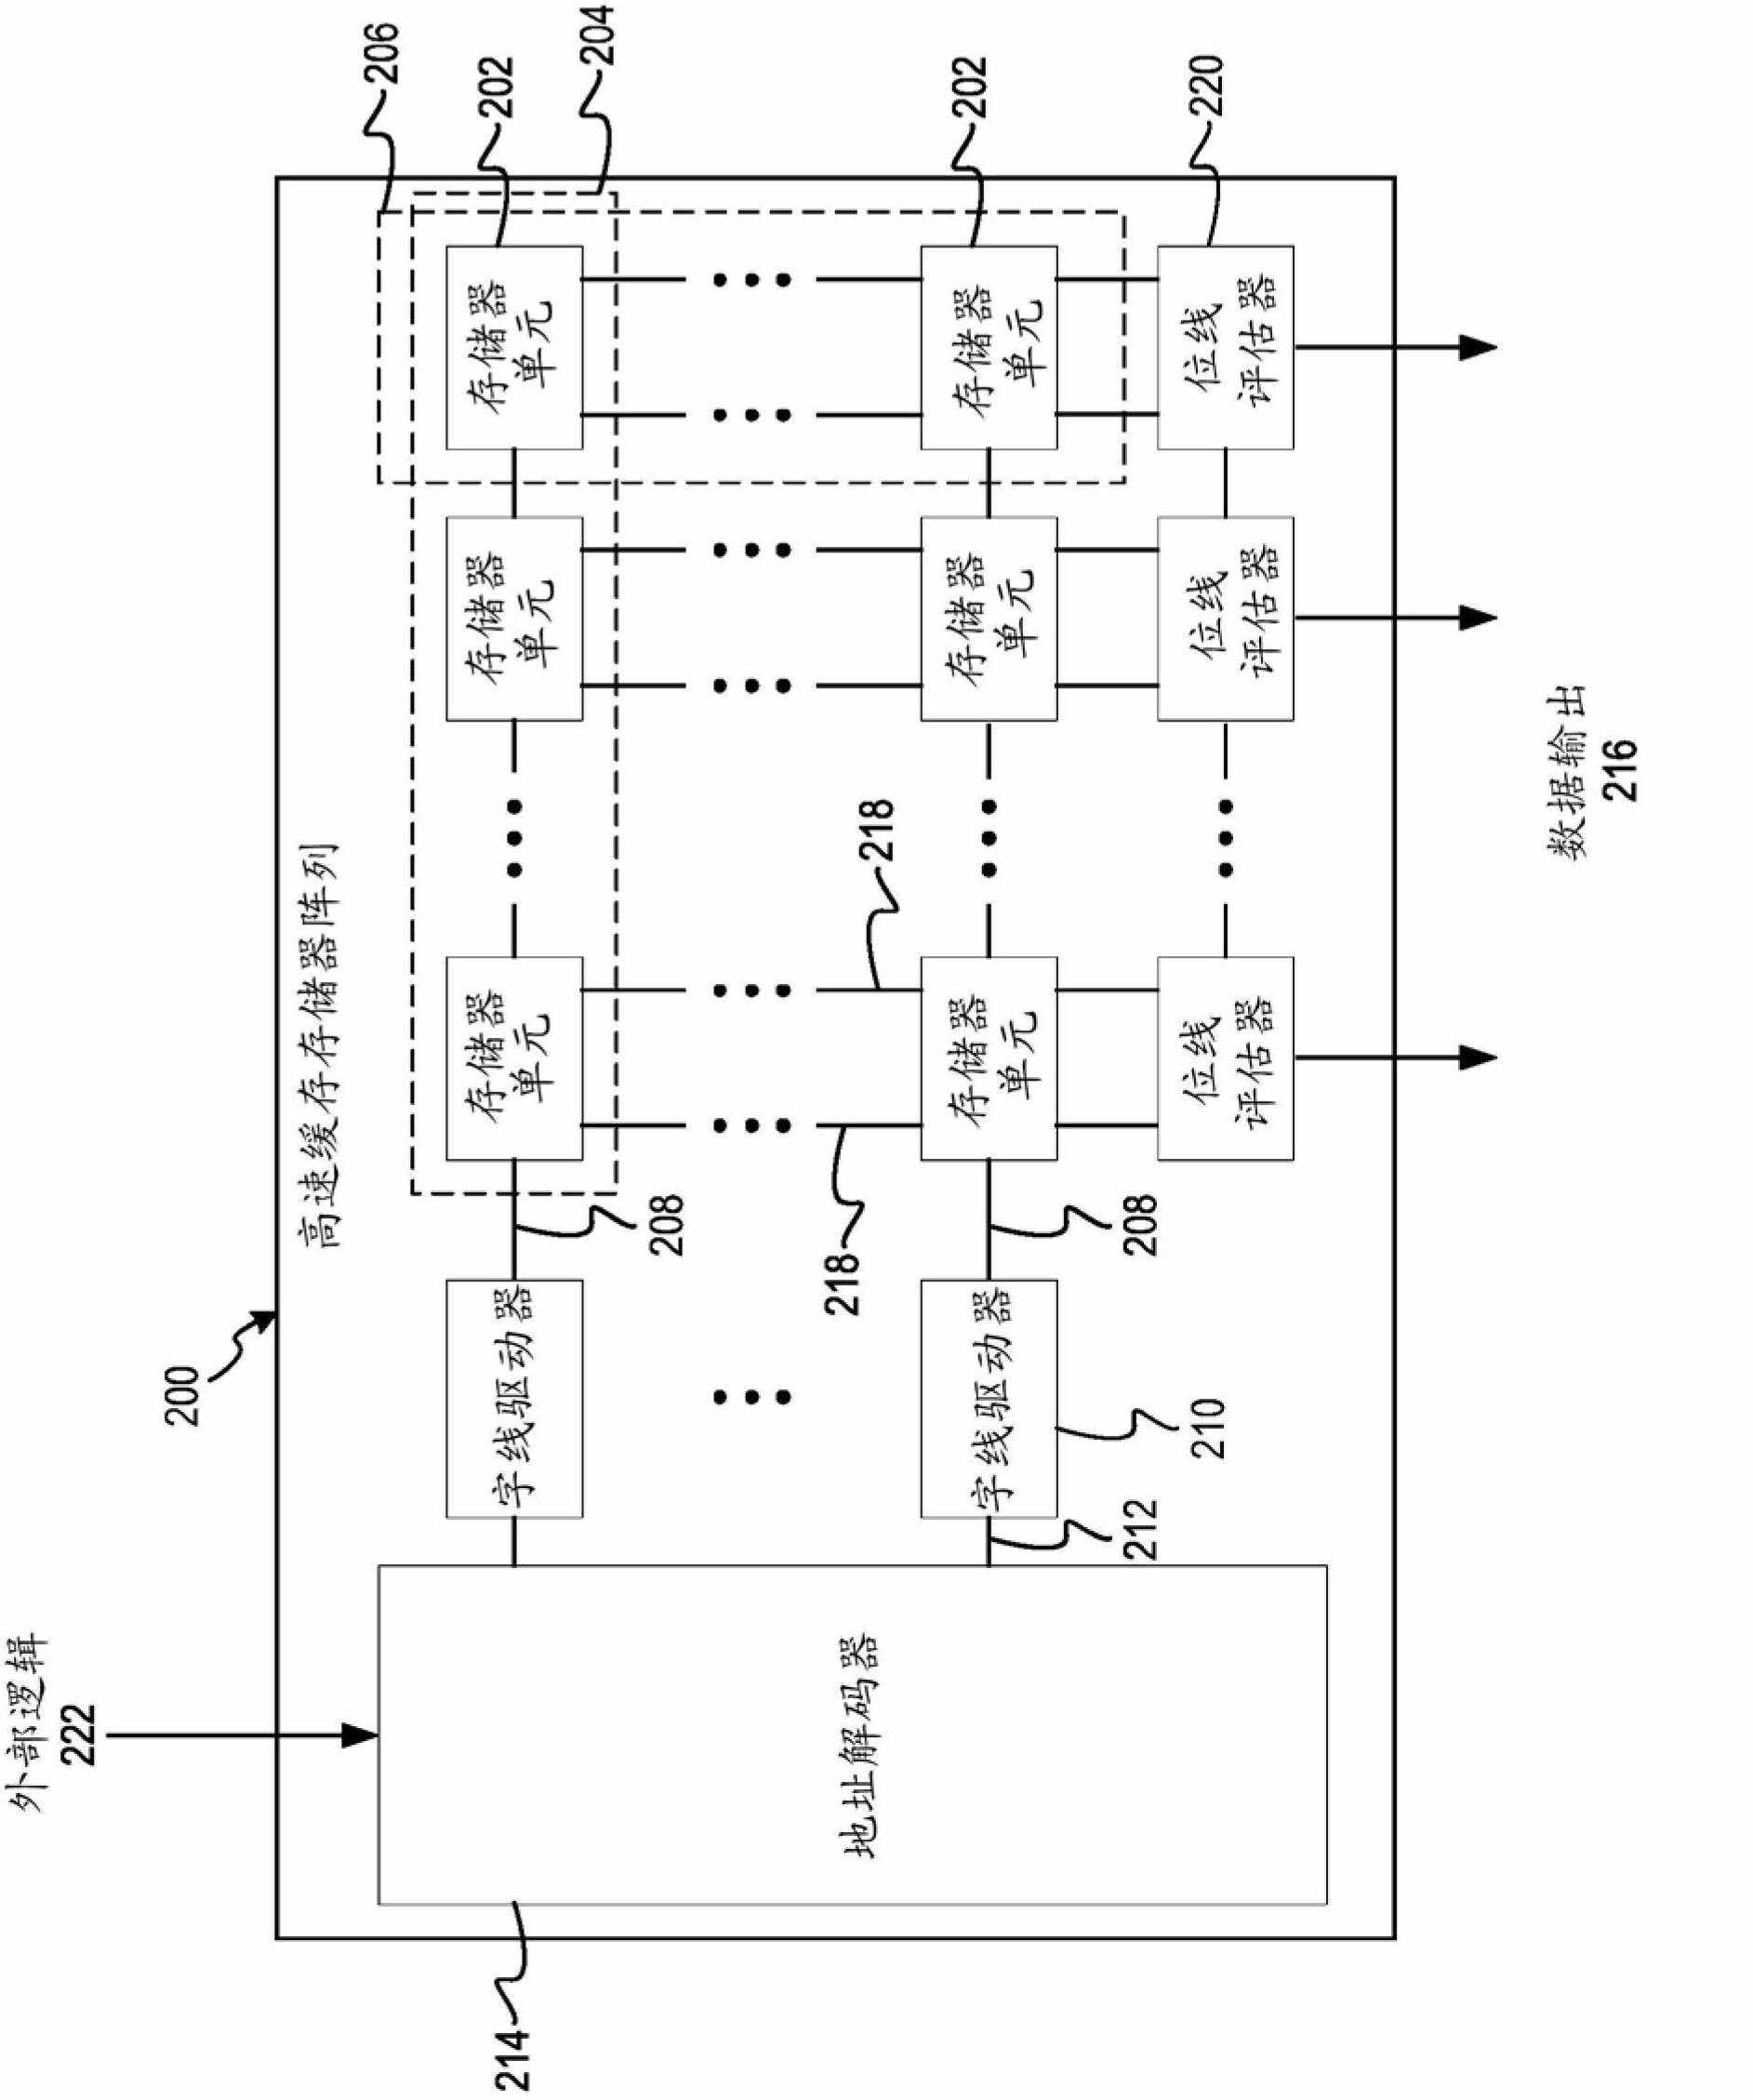 Cache access memory and method